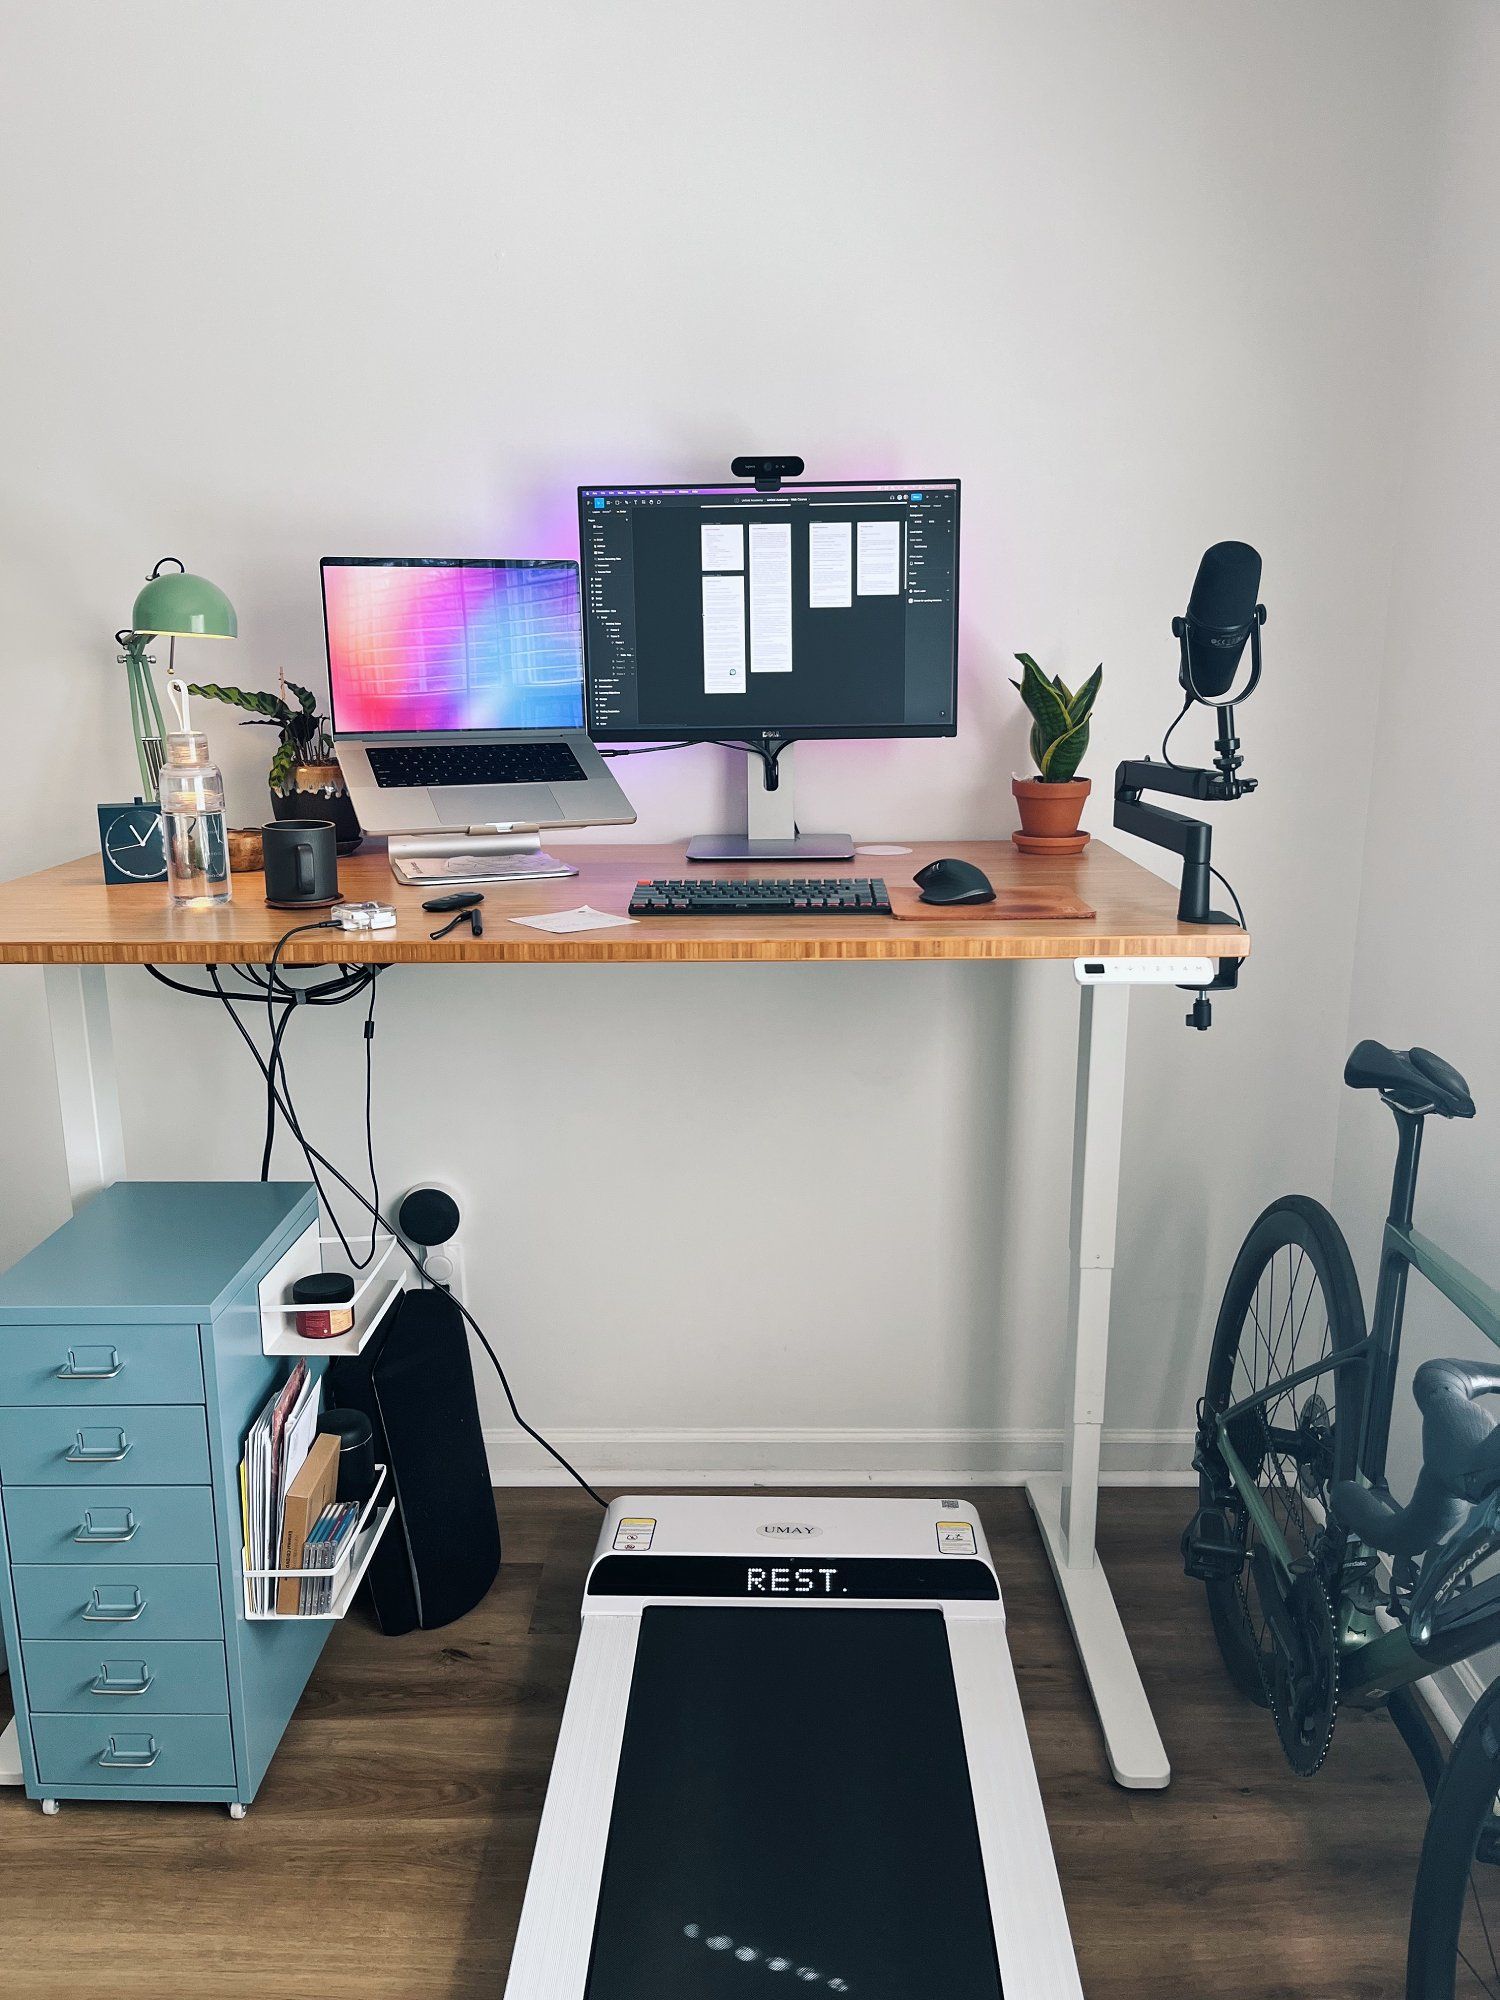 An UMAY treadmill placed under the desk in a designer’s home office